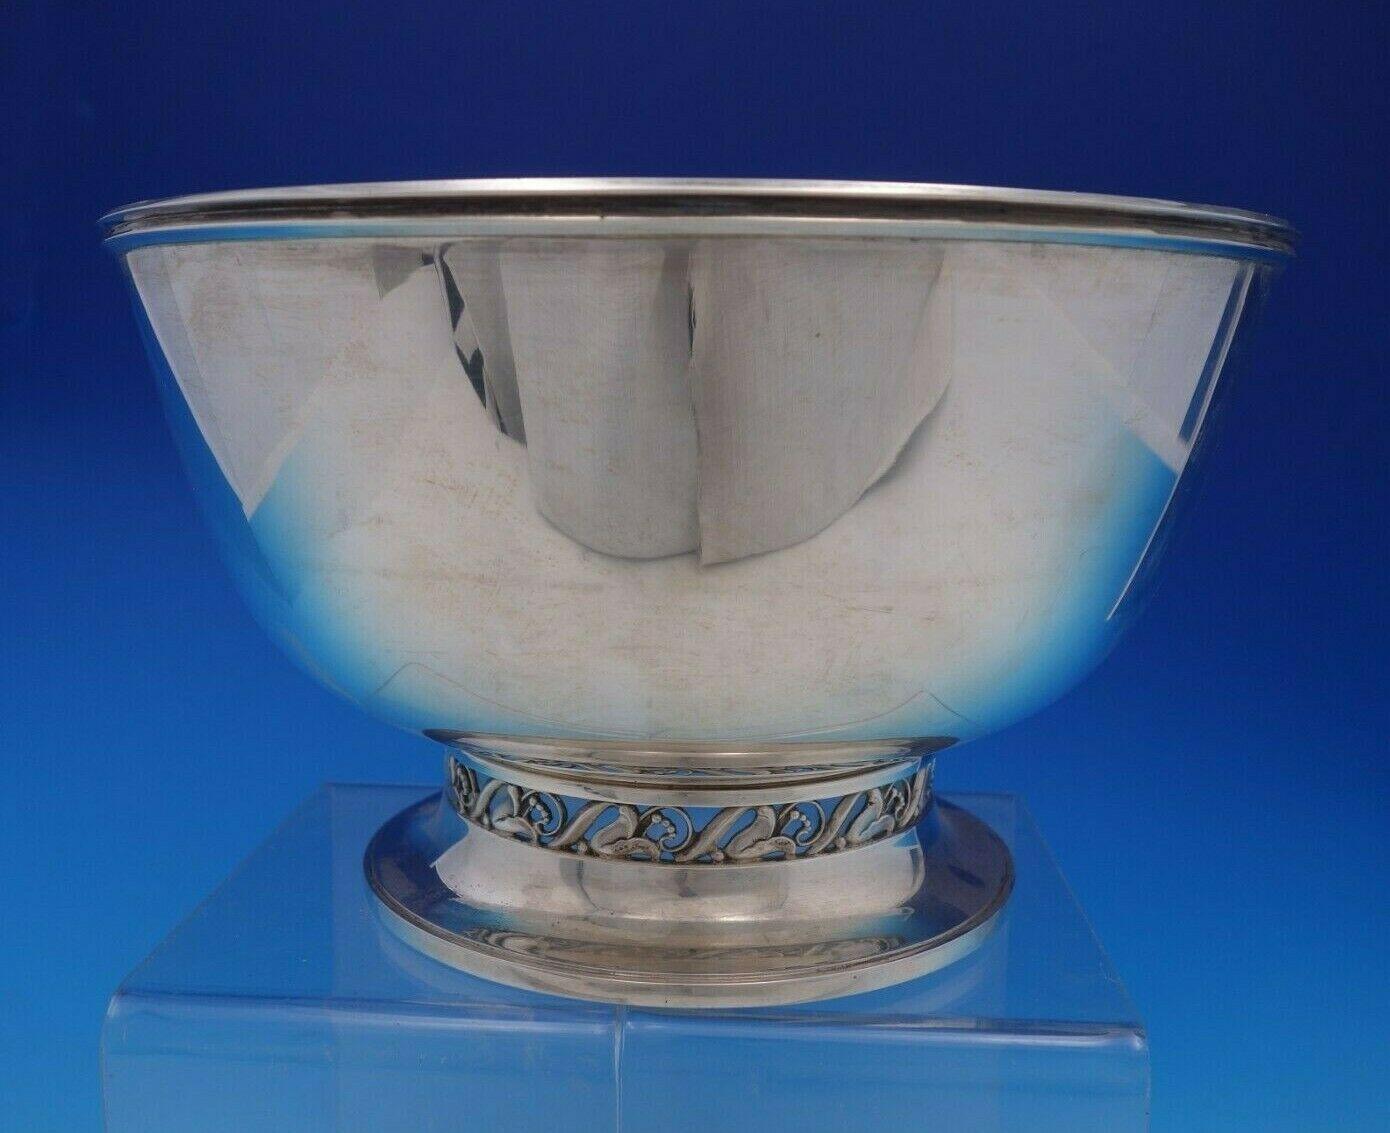 La Paglia by International

Superb La Paglia by International sterling silver bowl (Revere style) marked #13935-1. This bowl measures 5 7/8